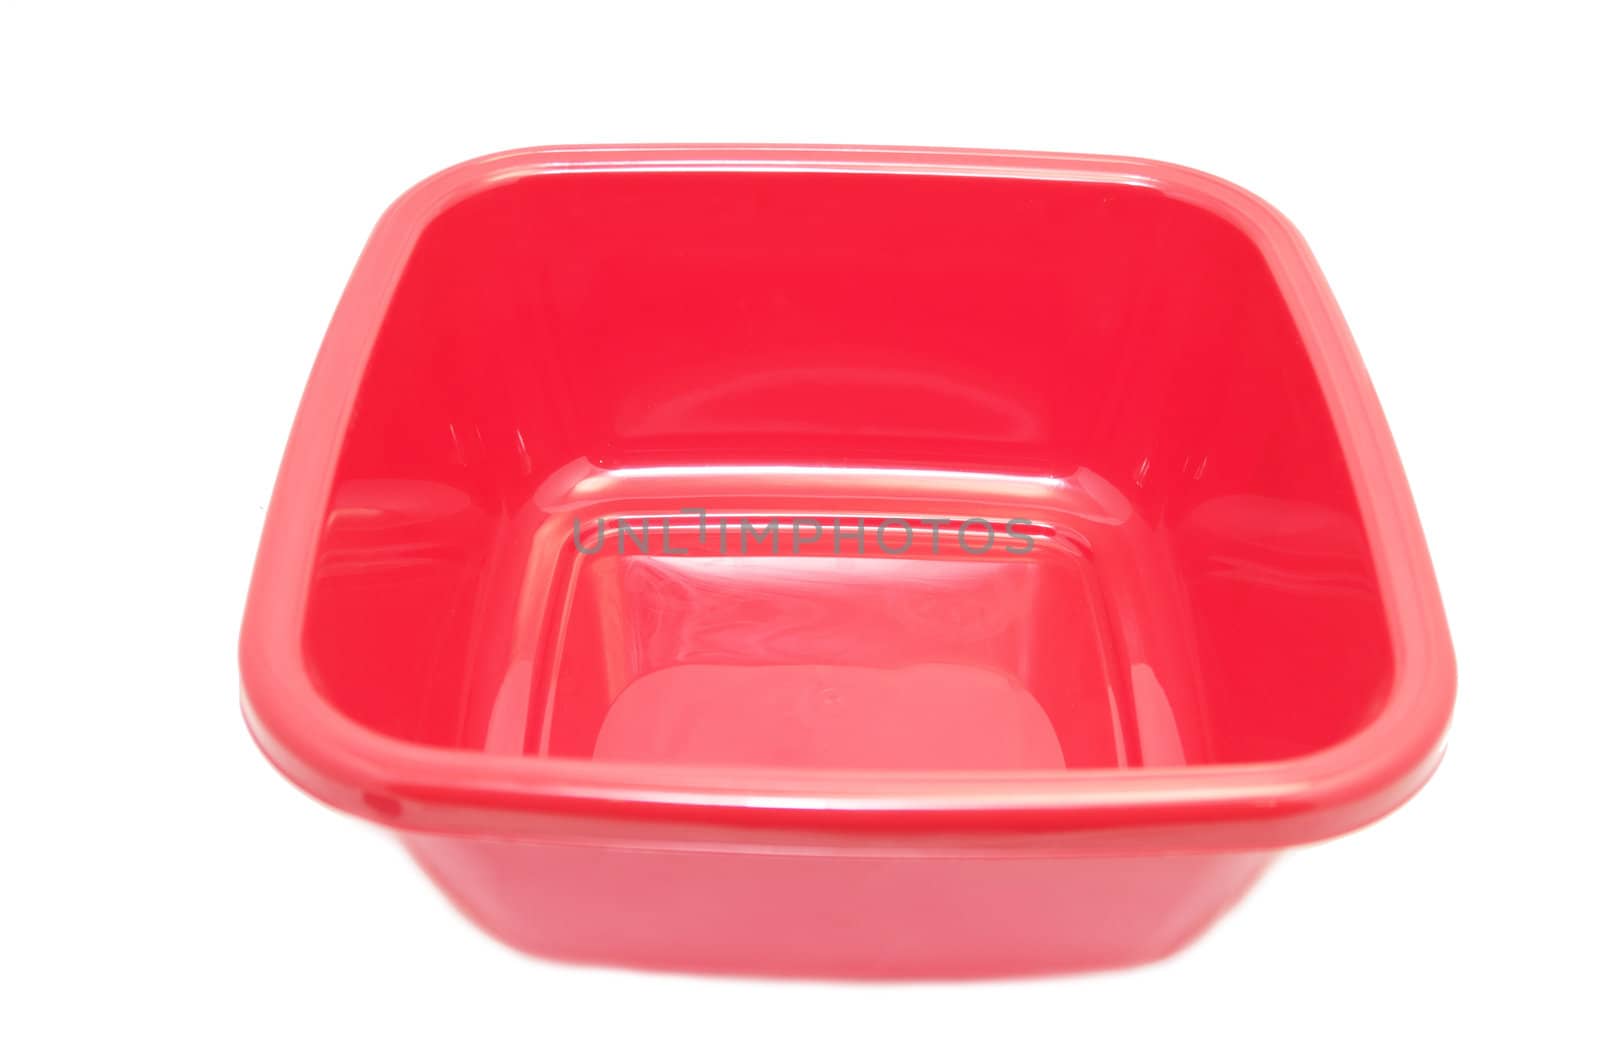 the red kitchen bowl on a white background